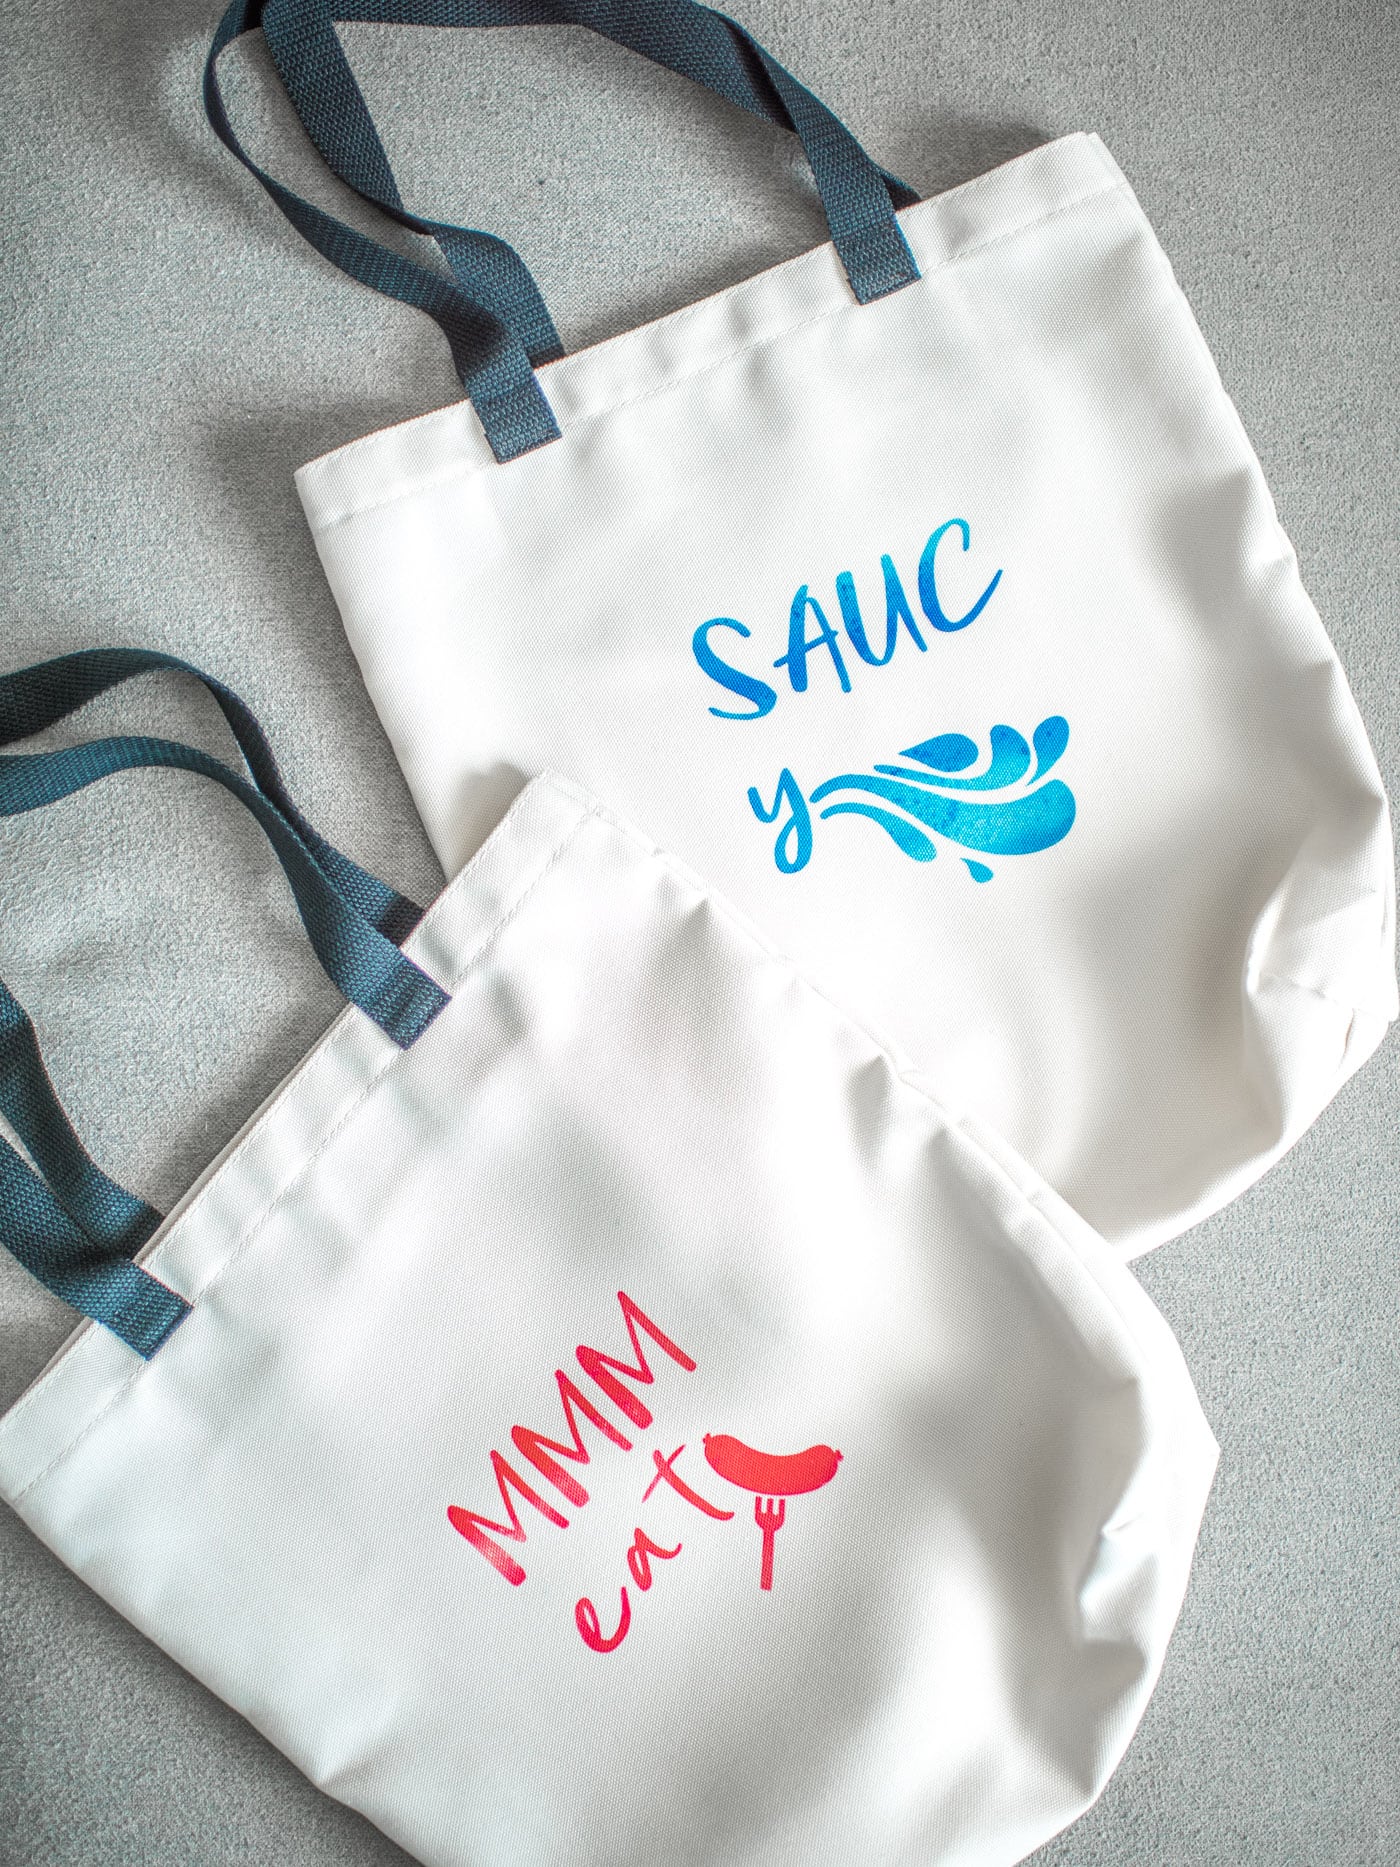 Cricut grocery tote bags